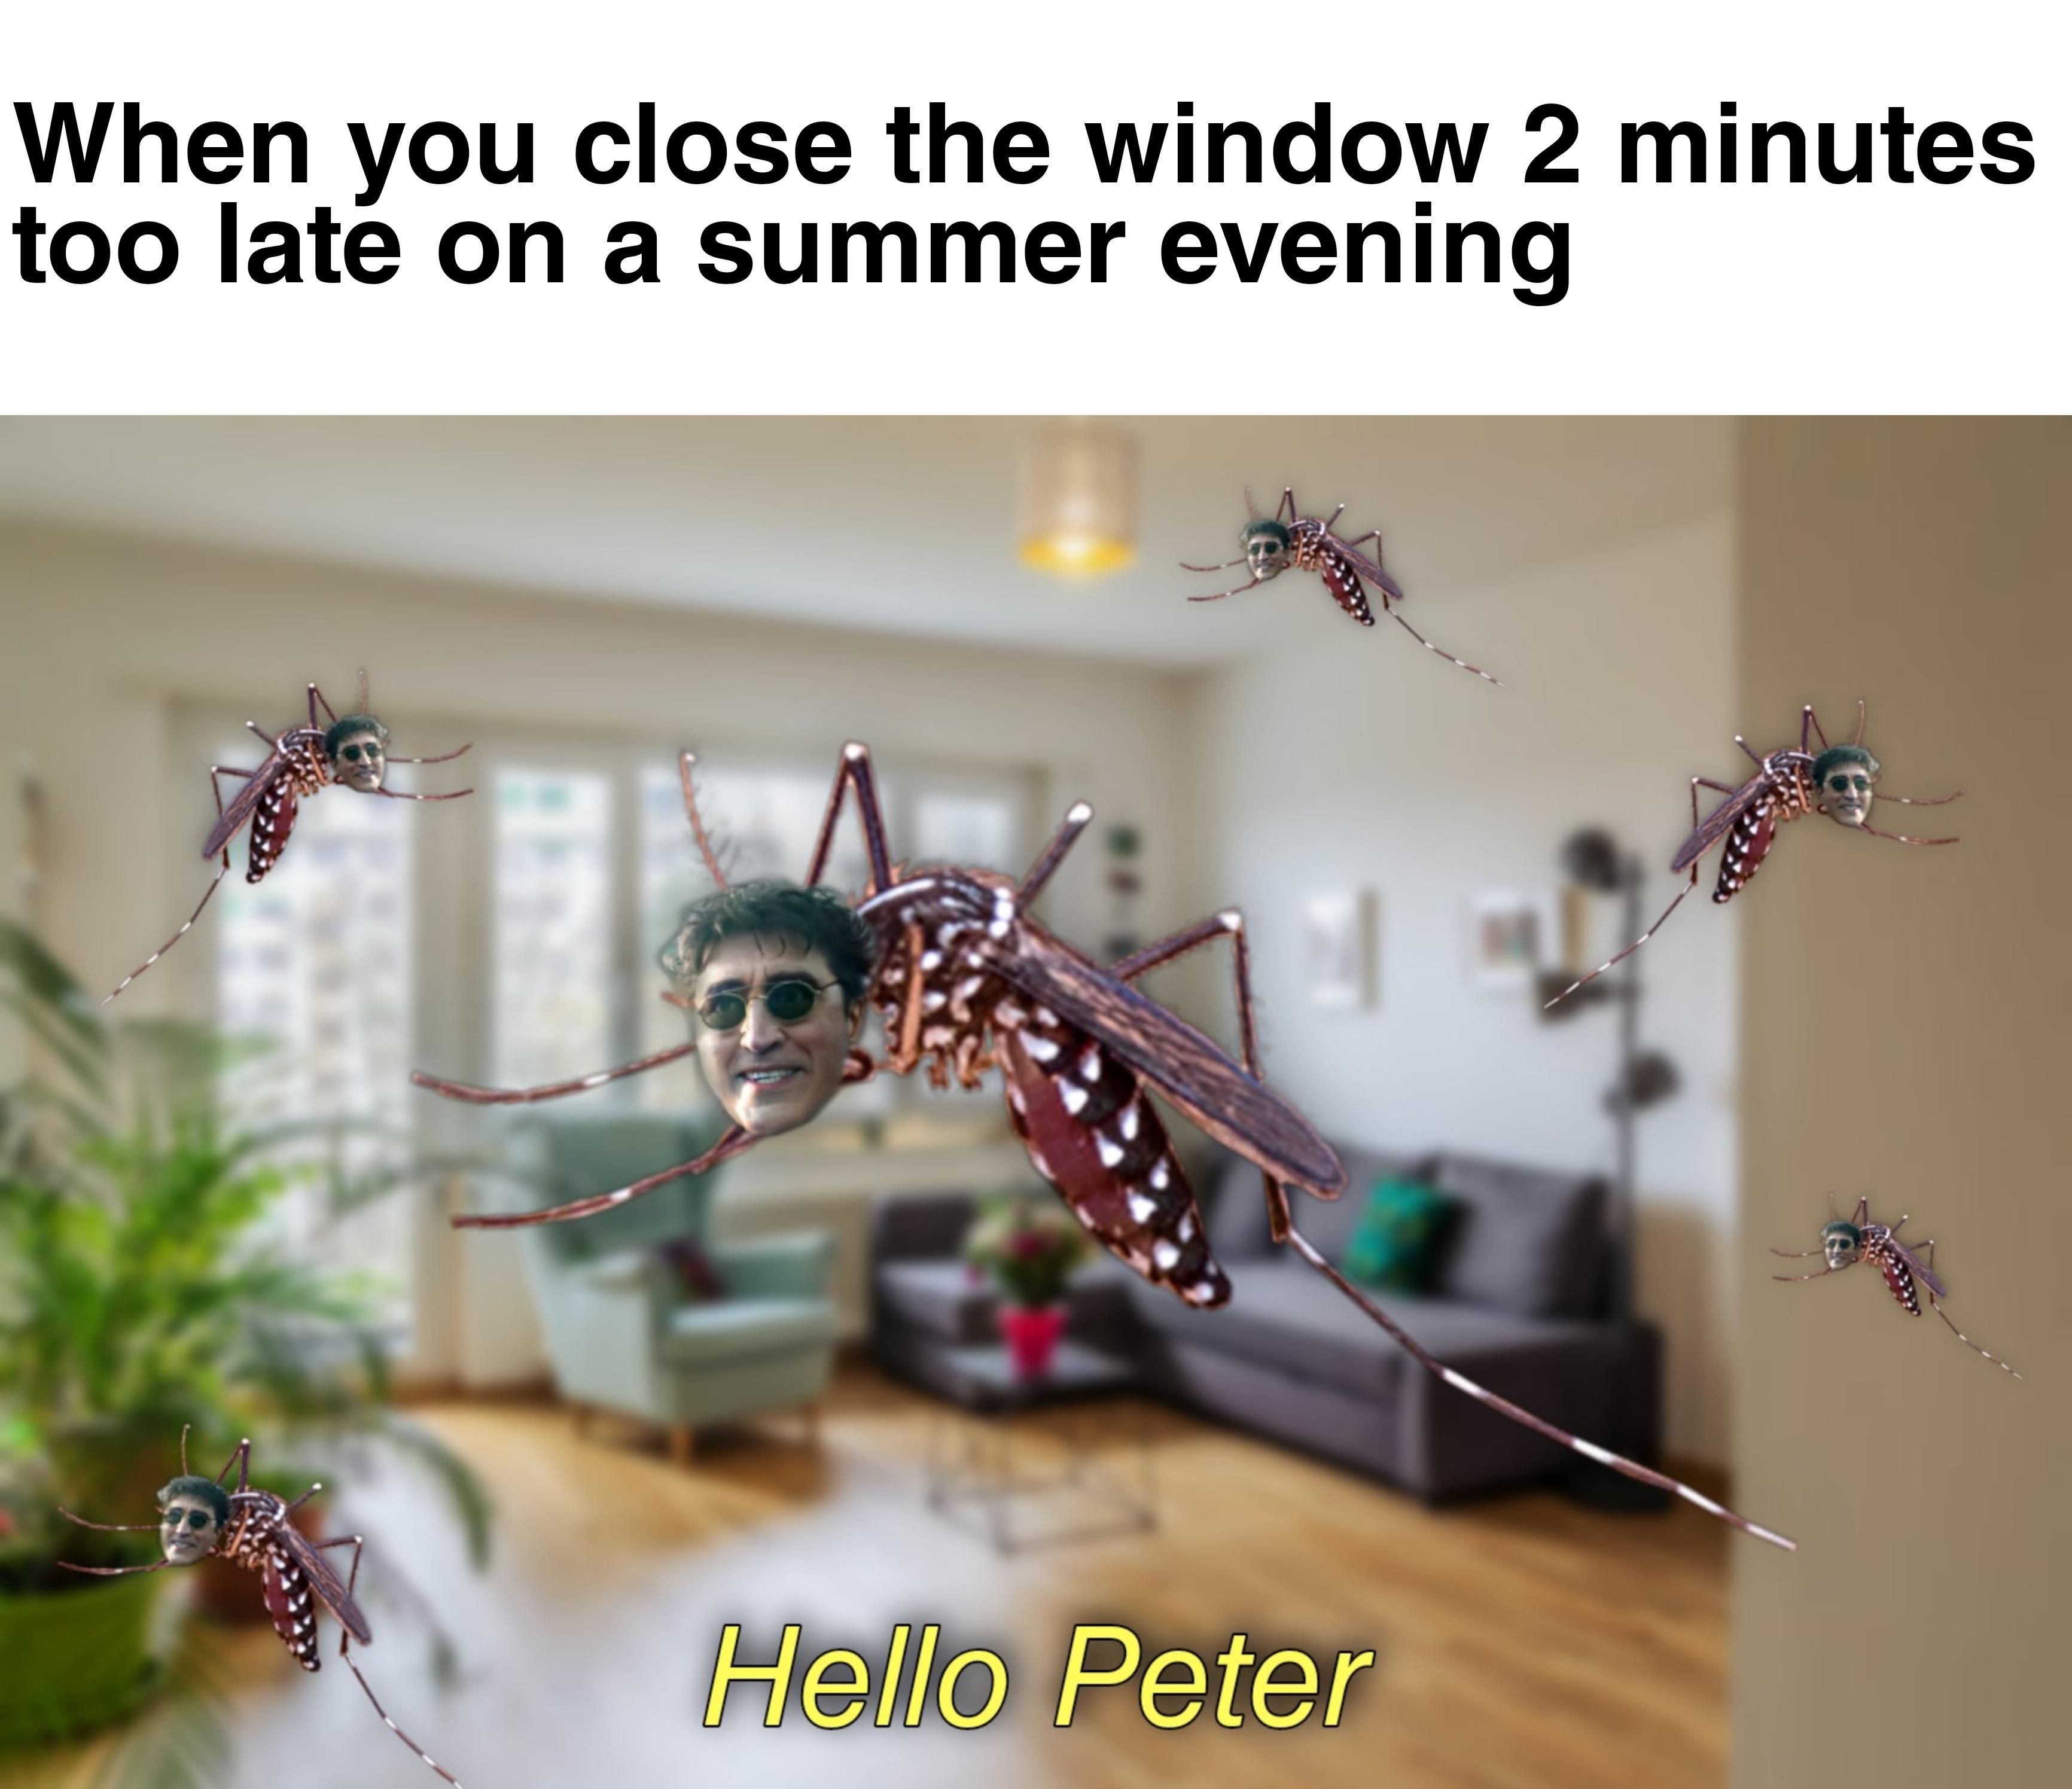 angle - When you close the window 2 minutes too late on a summer evening Hello Peter